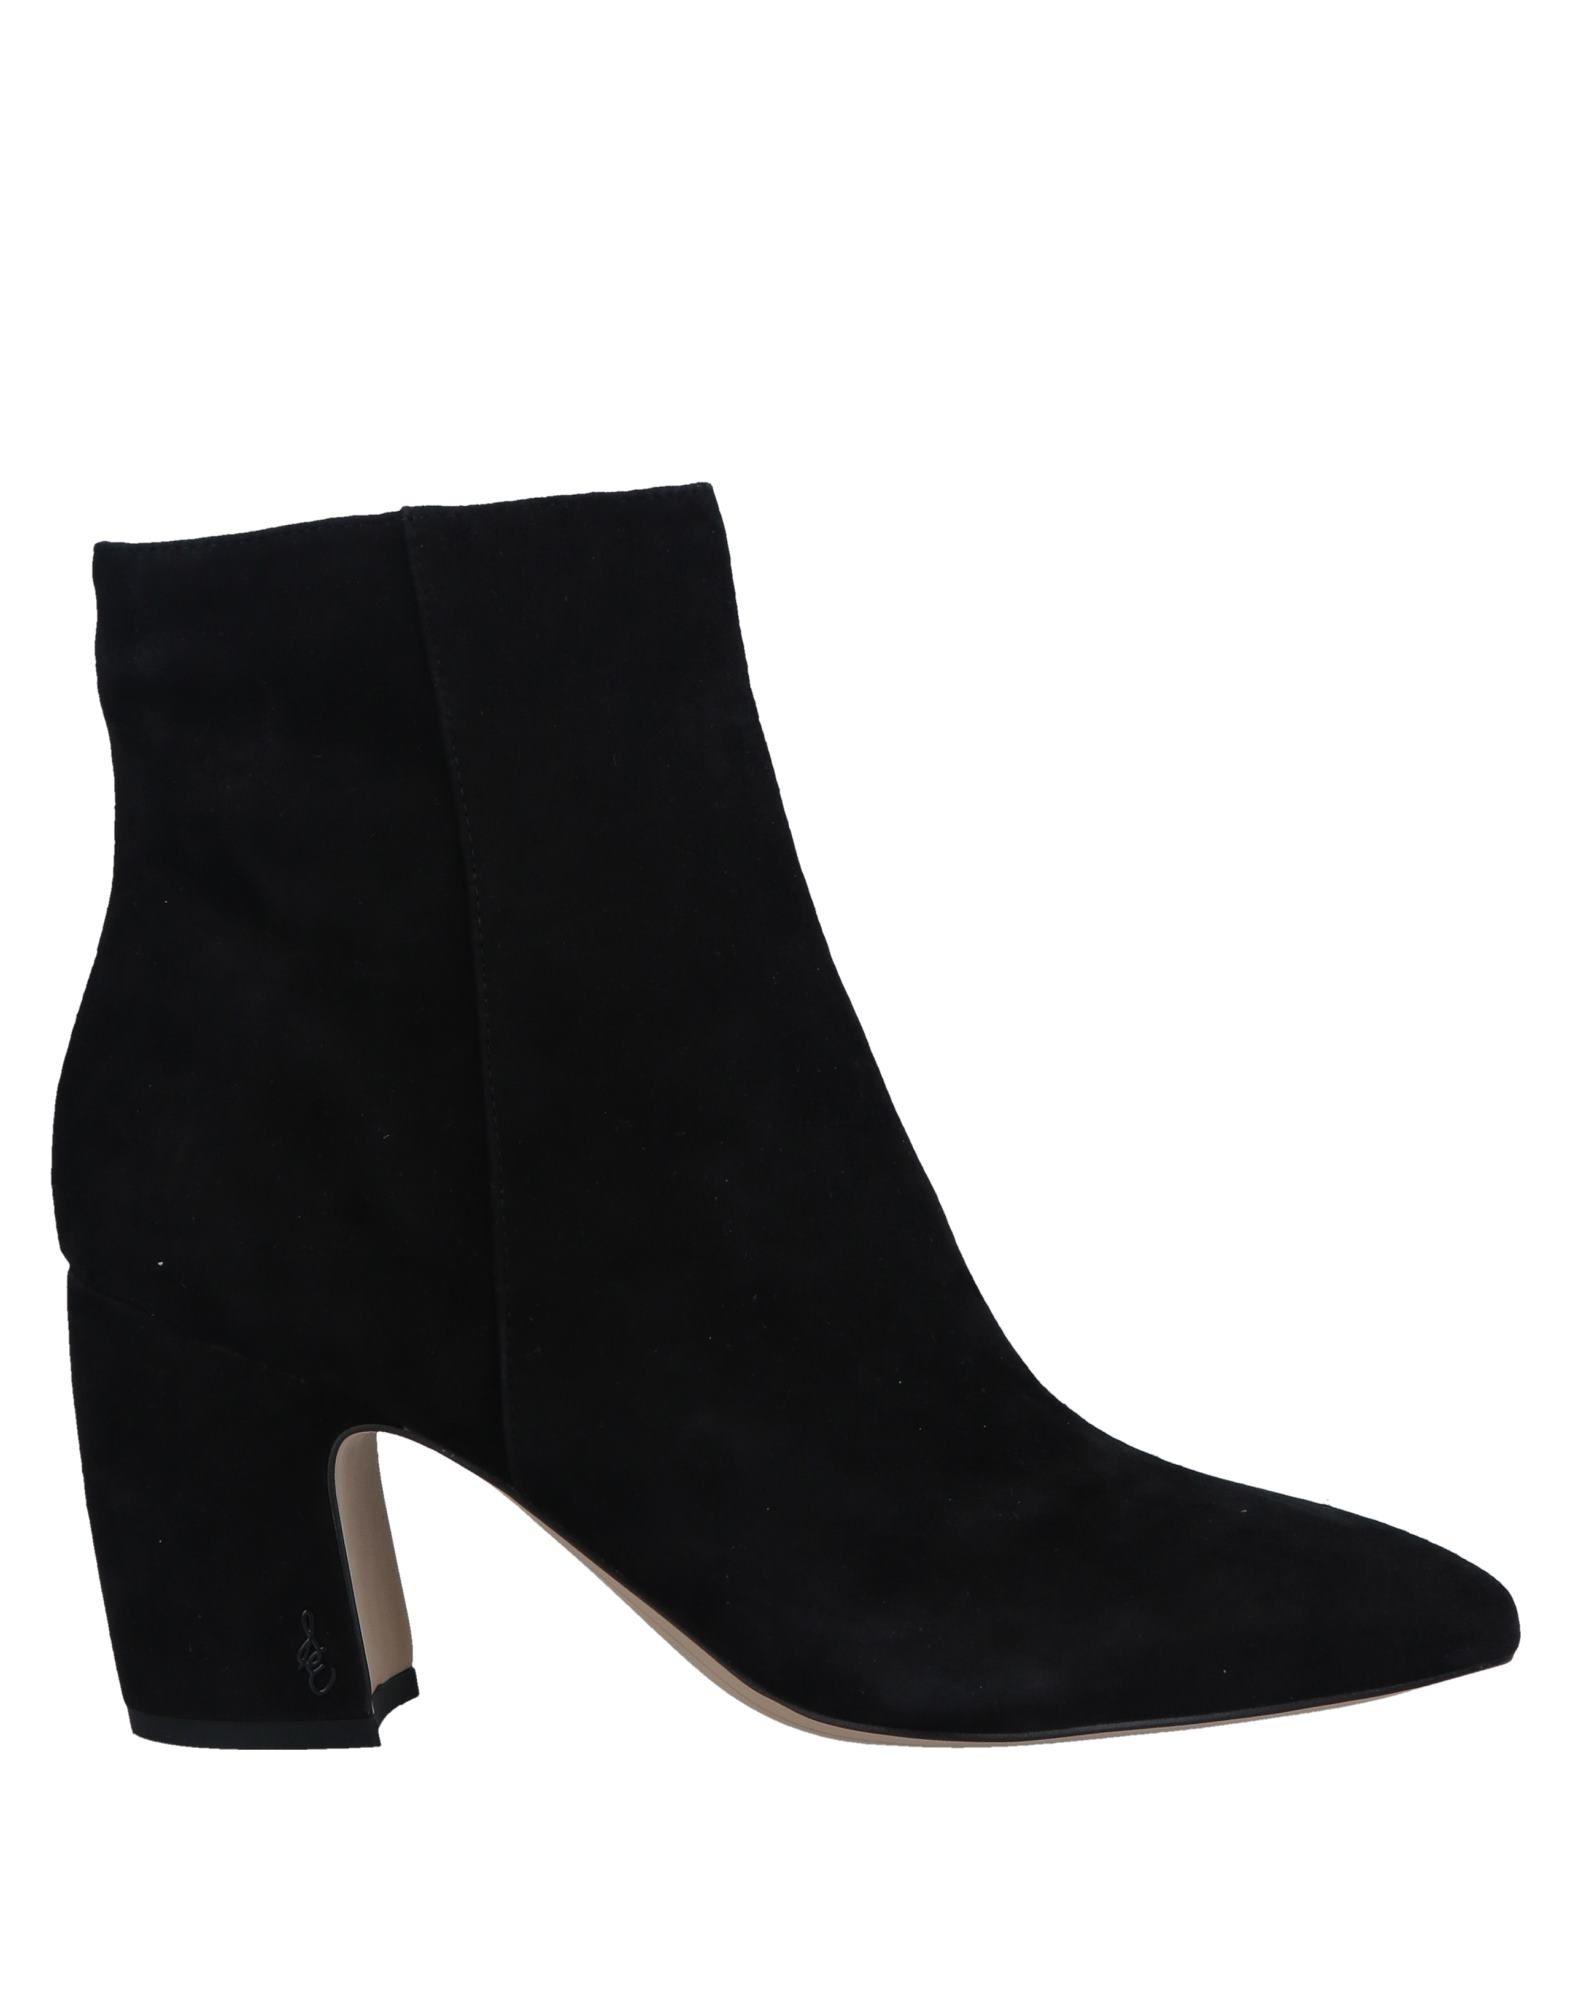 Sam Edelman Leather Ankle Boots in Black - Lyst